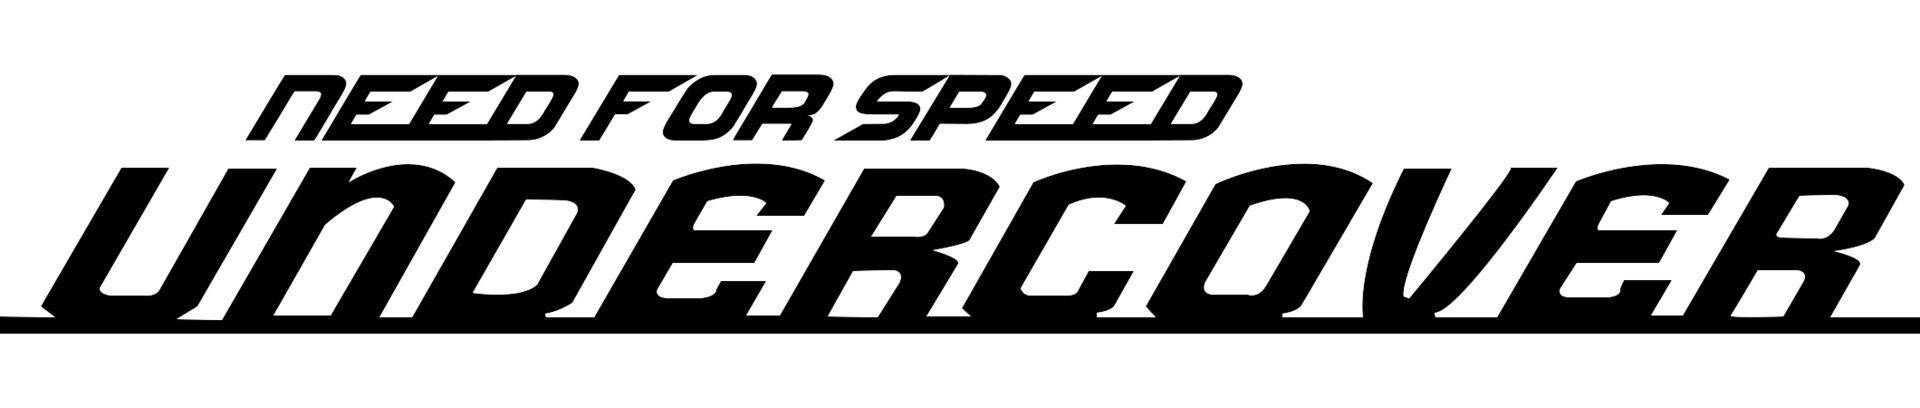 Need for Speed Undercover Logo - ArtStation - Need for Speed Logos Study - Part 2, Mighoet Sündback